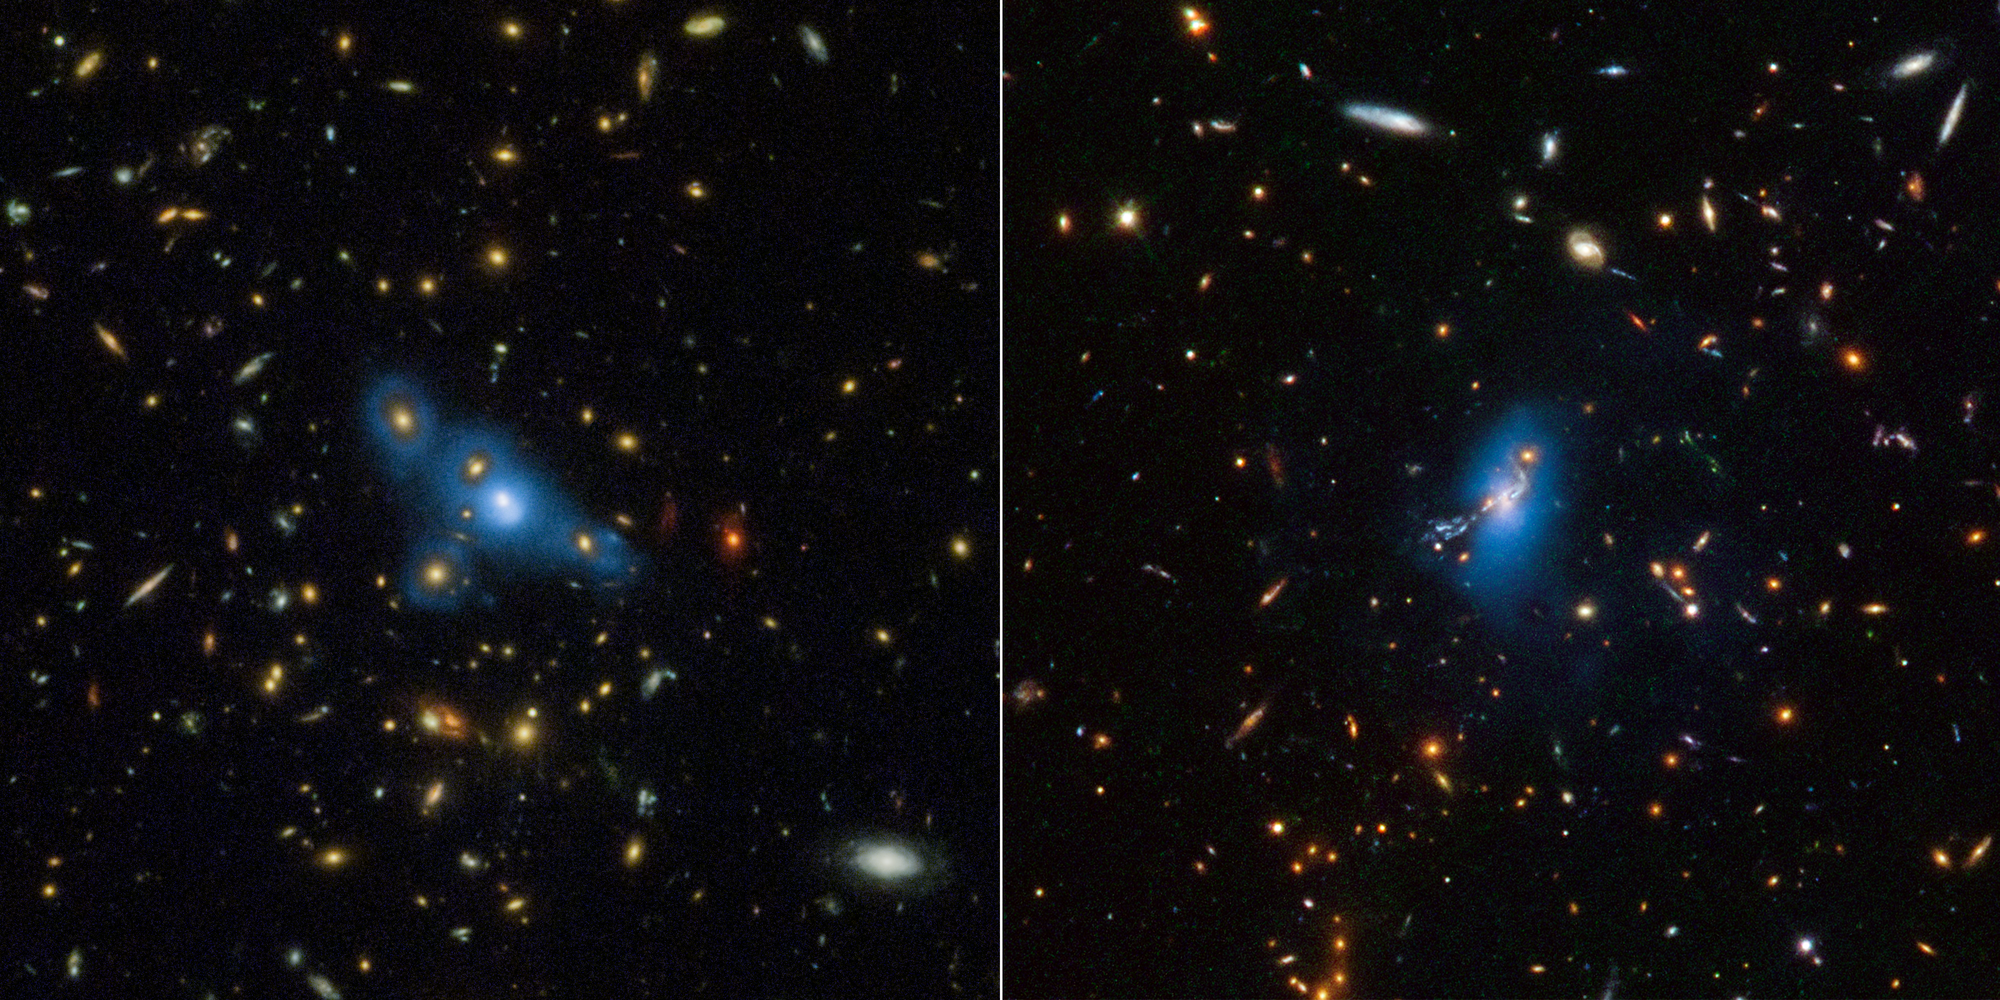 Two images. left: yellow-orange galaxies, in blue halo (intracluster light). right: 2 elongated blueish, irregular-shaped objects, several small yellow-orange galaxies. between 2 elongated objects: bright spot in a blue halo (intracluster light).